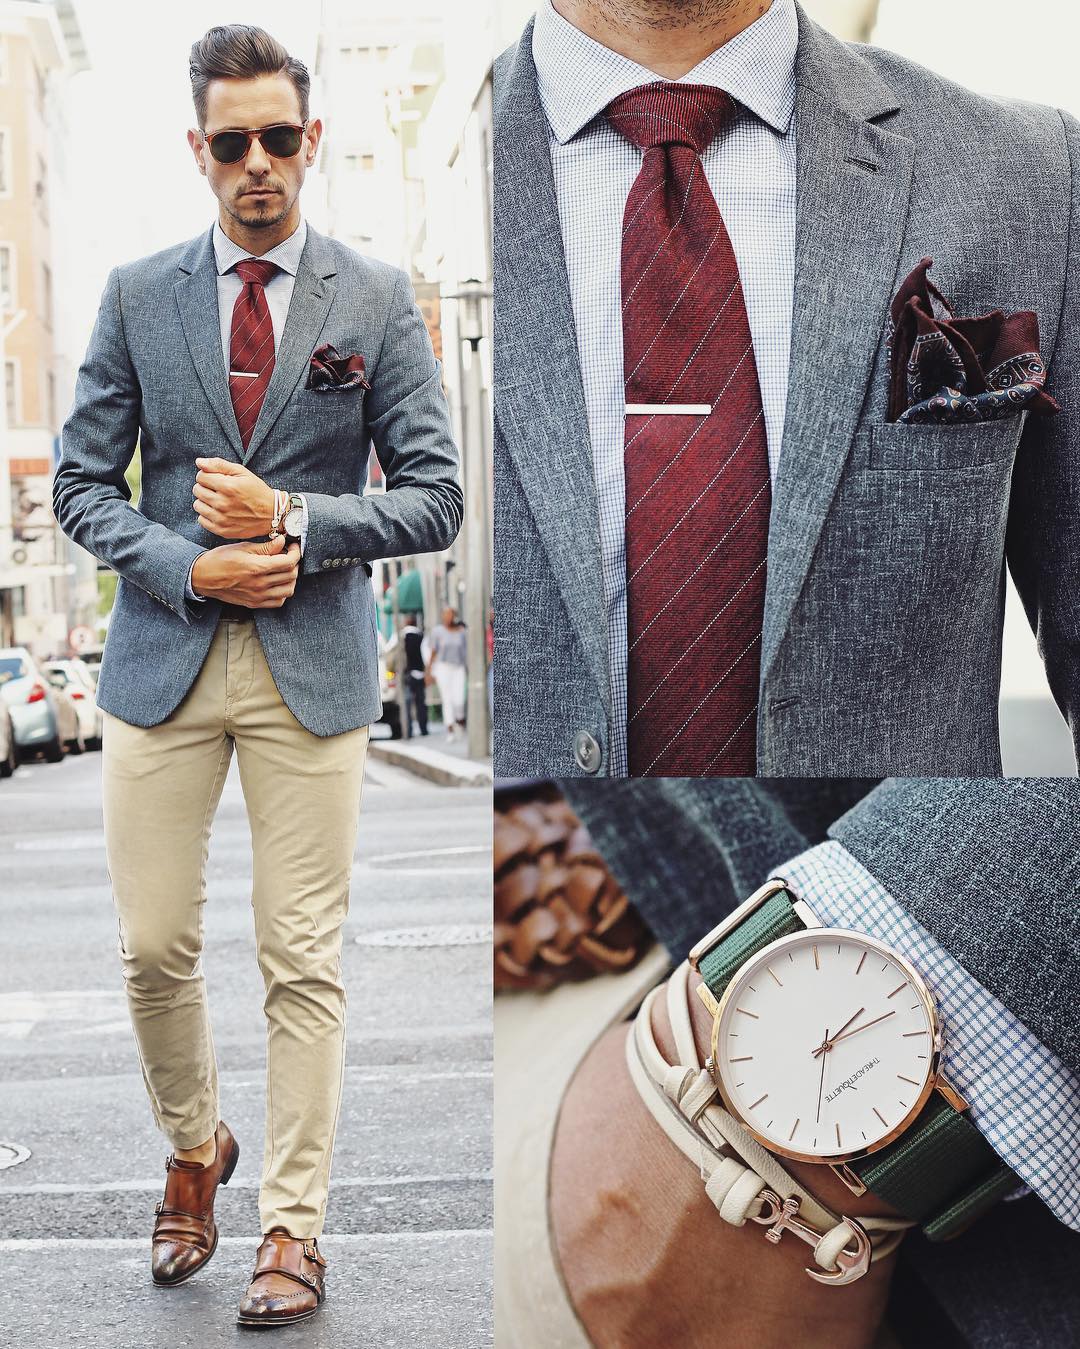 Suit, Accessories And Watch Combinations For Men